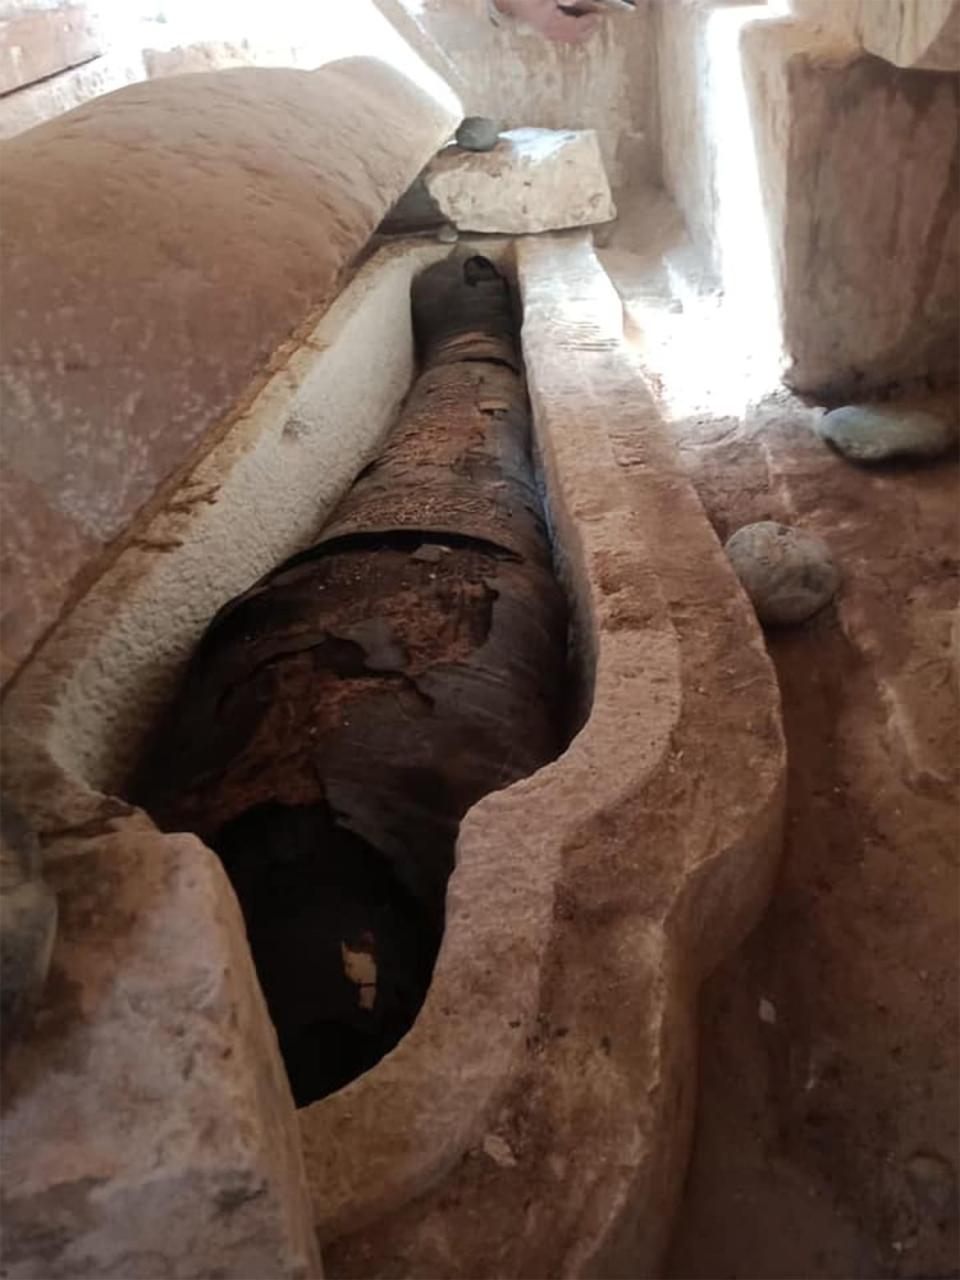 <div class="inline-image__caption"><p>One of the tombs was completely sealed.</p></div> <div class="inline-image__credit">Egyptian Ministry of Tourism and Antiquities</div>